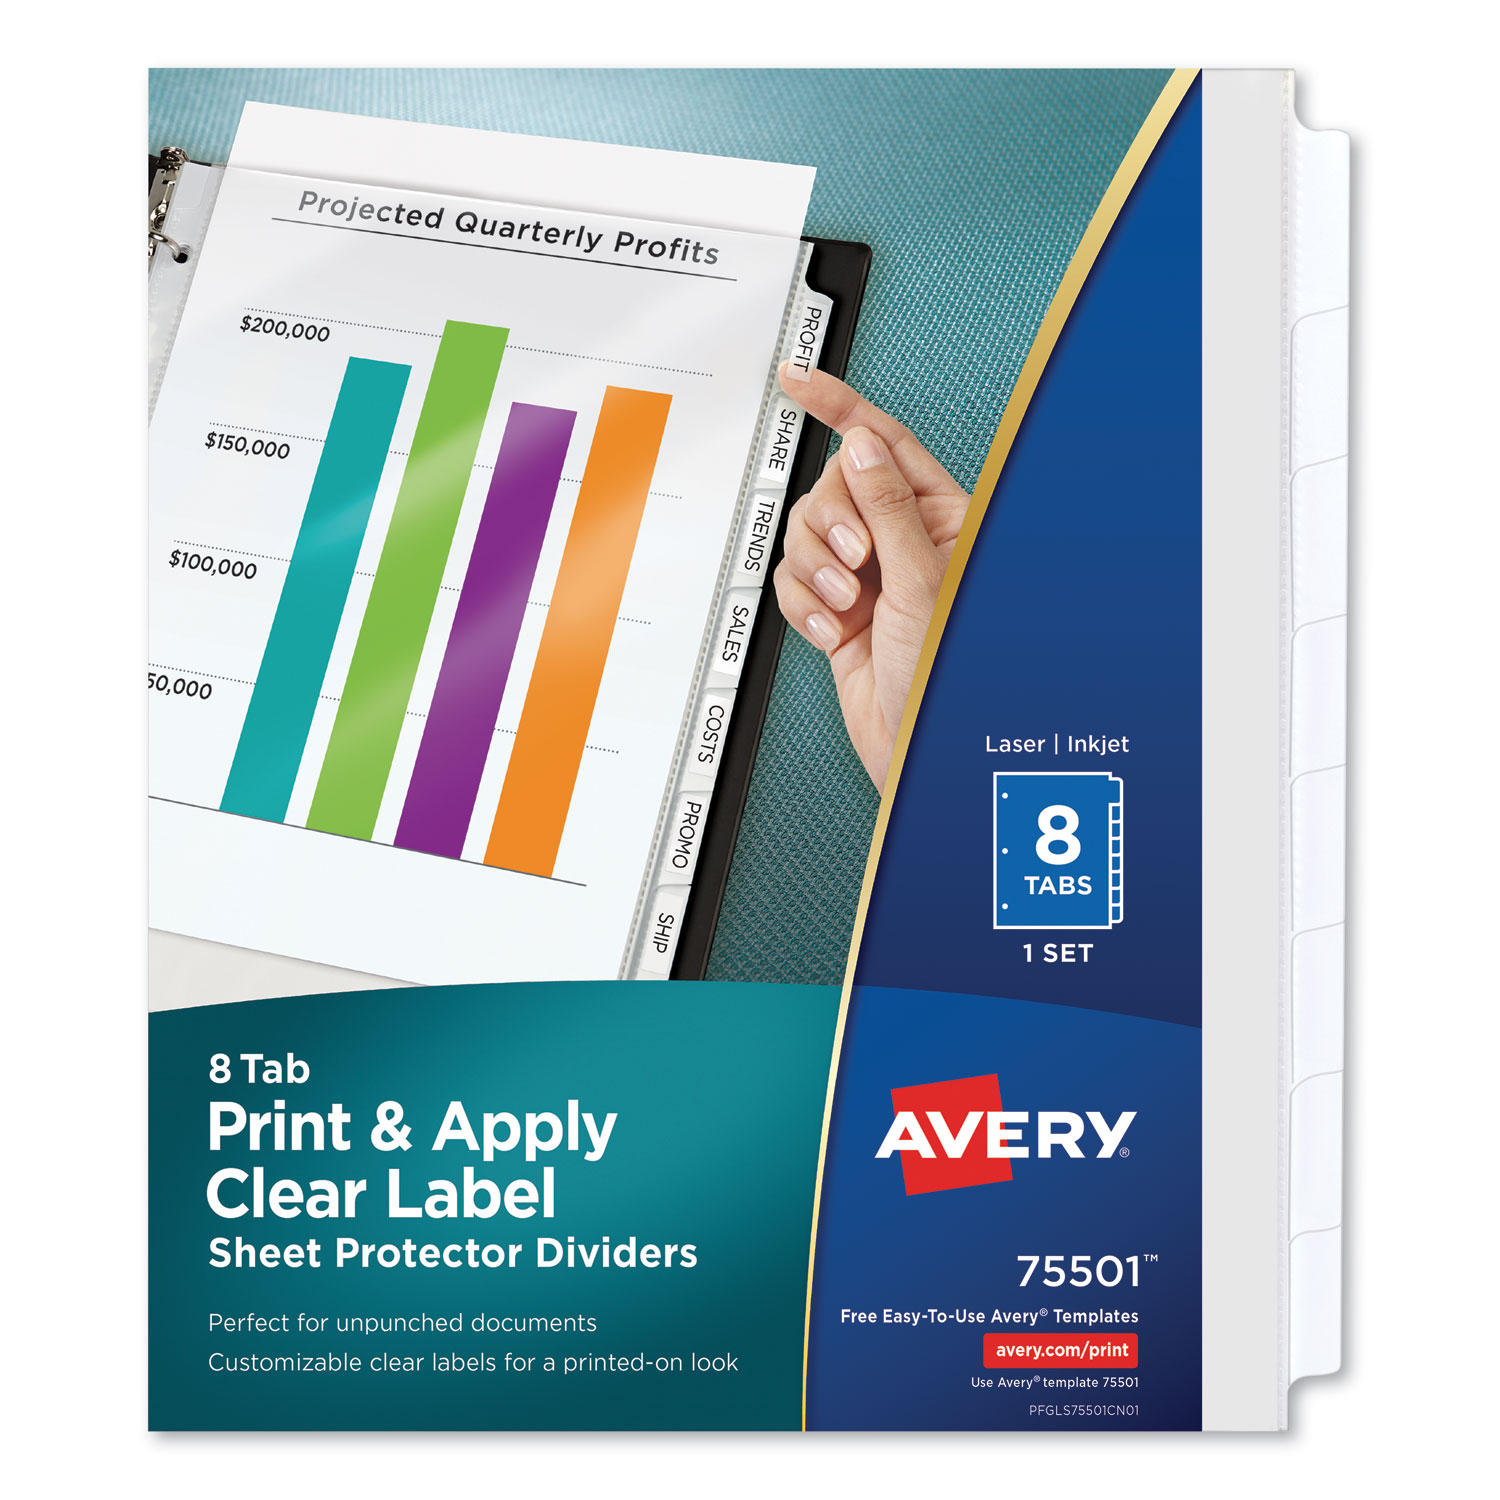  Avery 75501 Print and Apply Index Maker Clear Label Sheet Protector Dividers with White Tabs, 8-Tab, 11 x 8.5, Clear, 1 Set (AVE75501) 